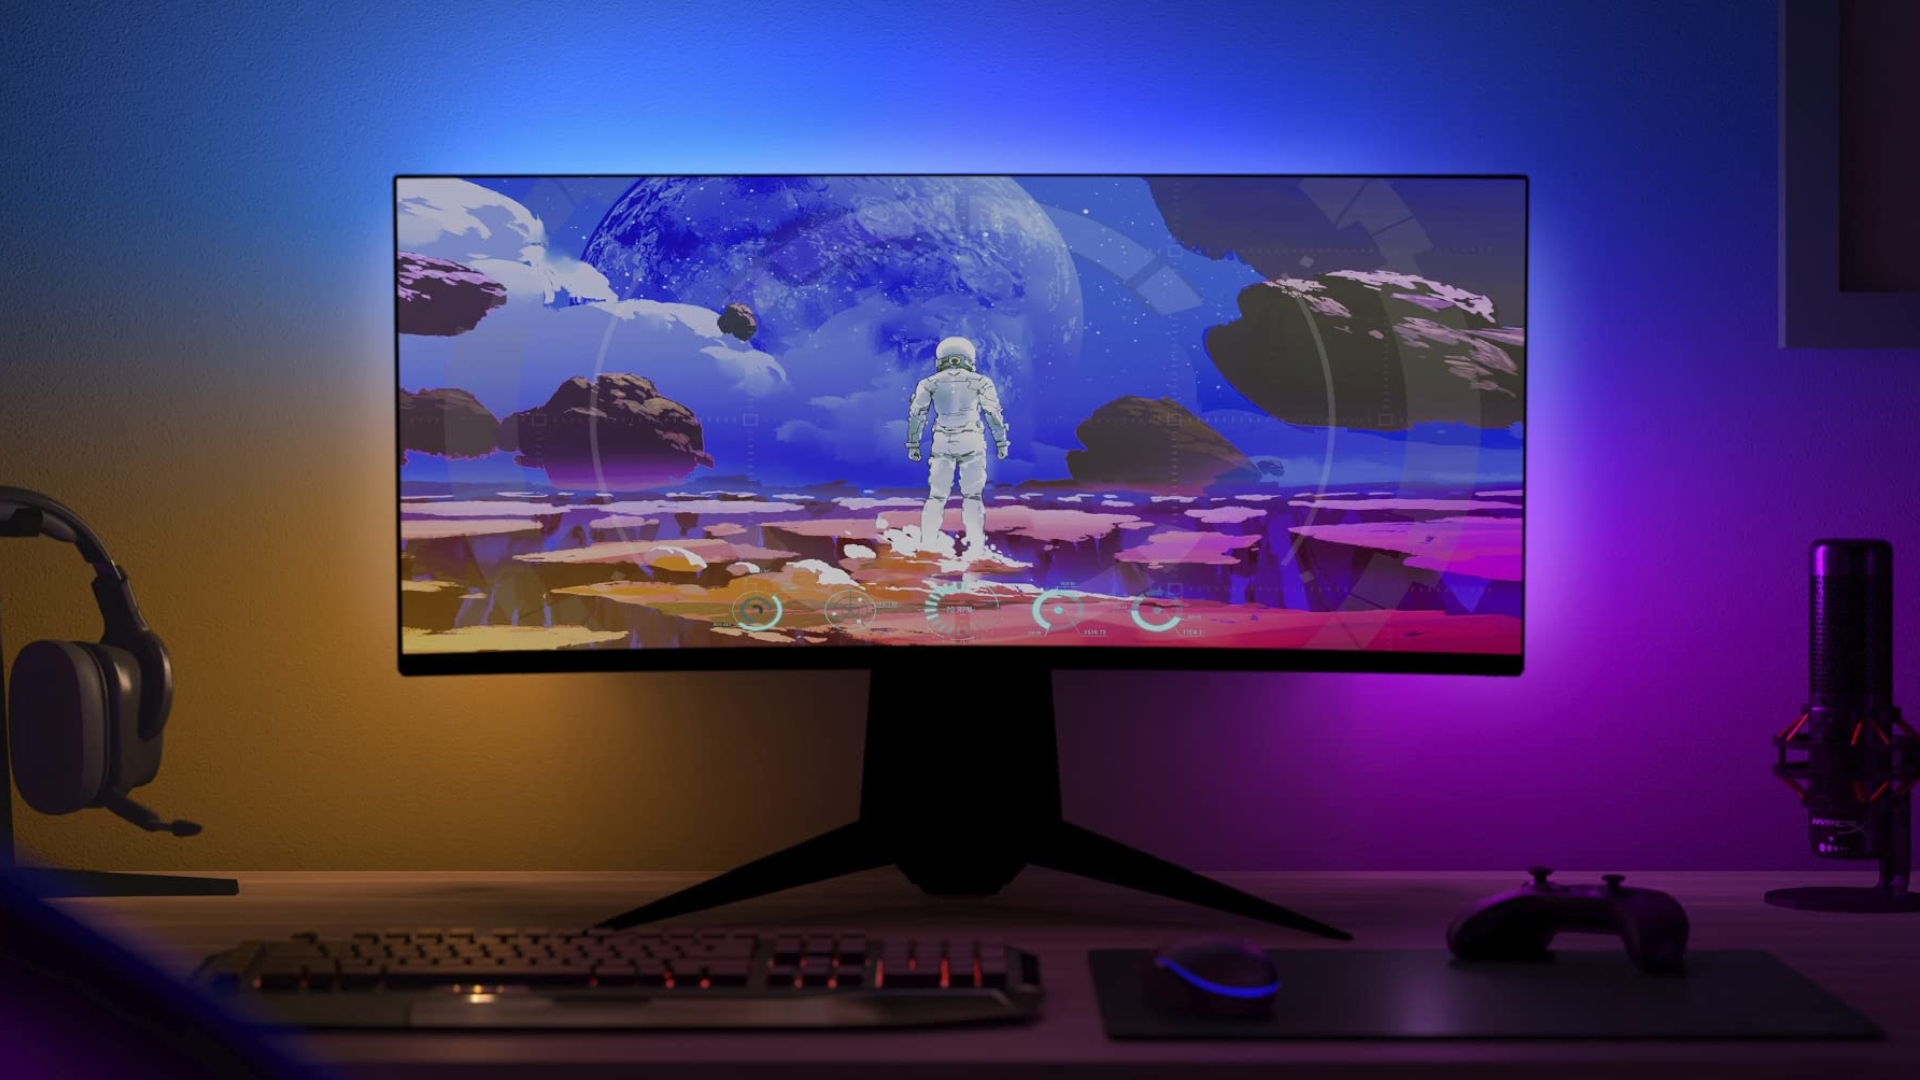 Philips Hue lighting producing ambient lighting on a gaming monitor.